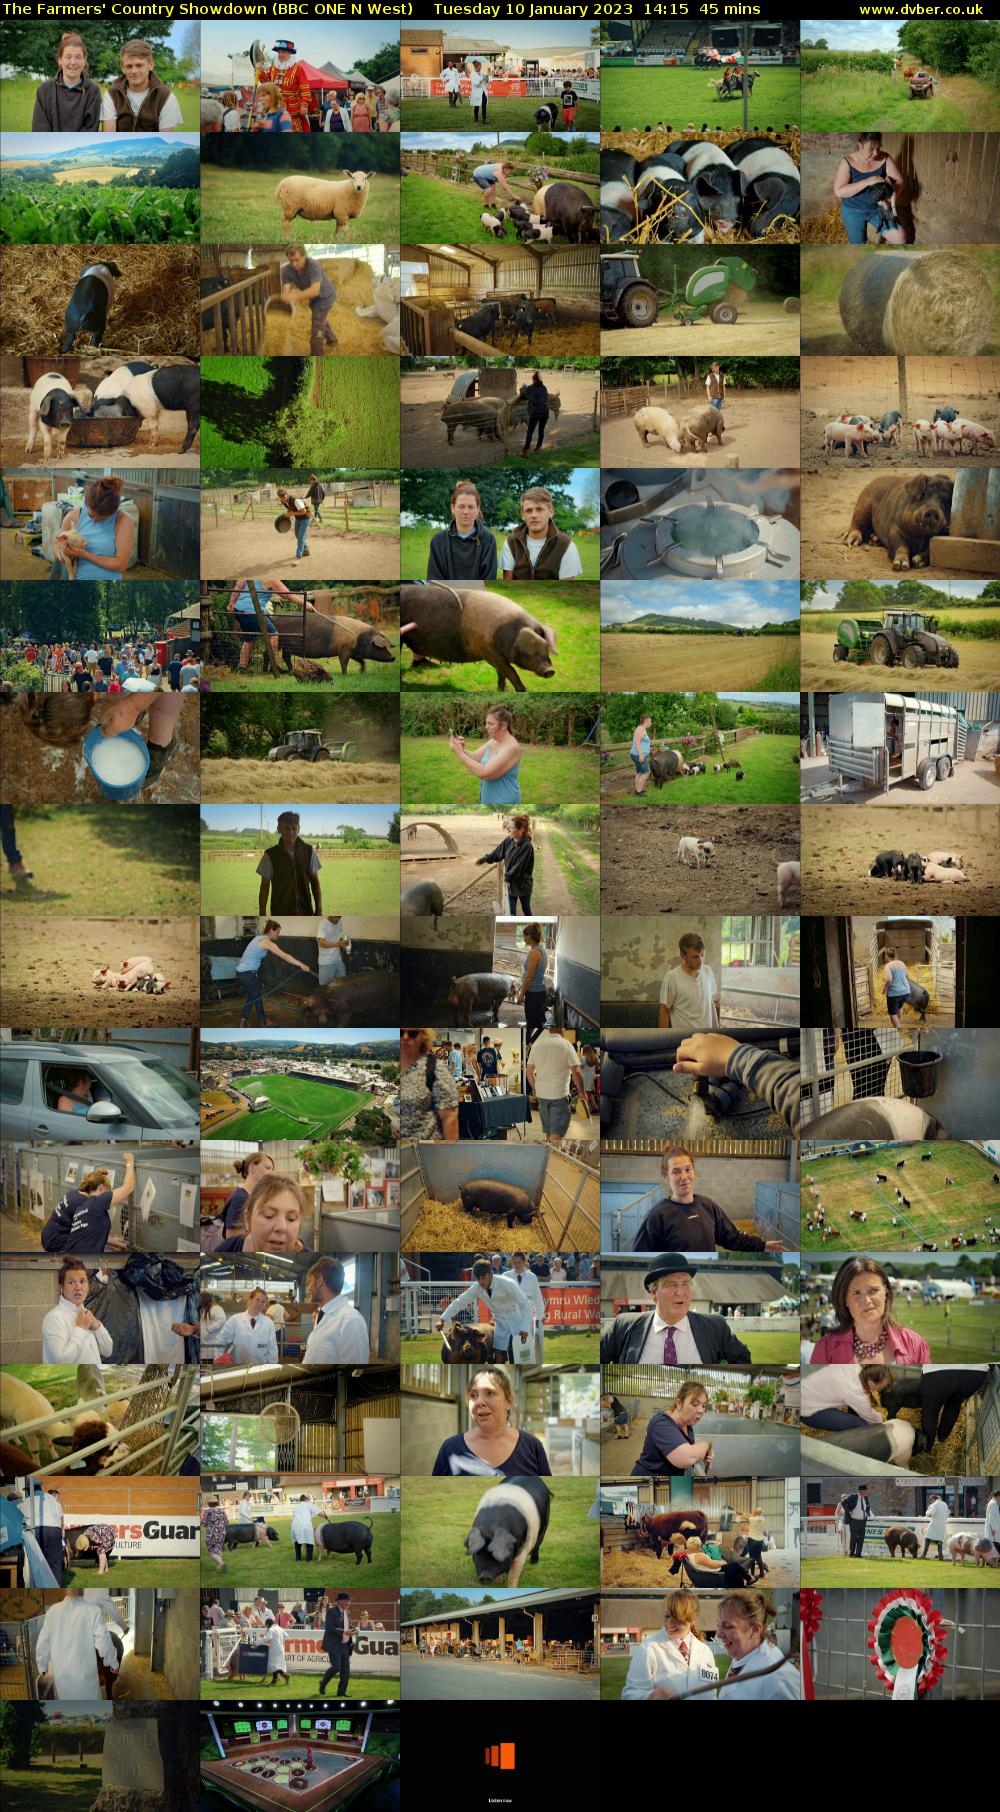 The Farmers' Country Showdown (BBC ONE N West) Tuesday 10 January 2023 14:15 - 15:00